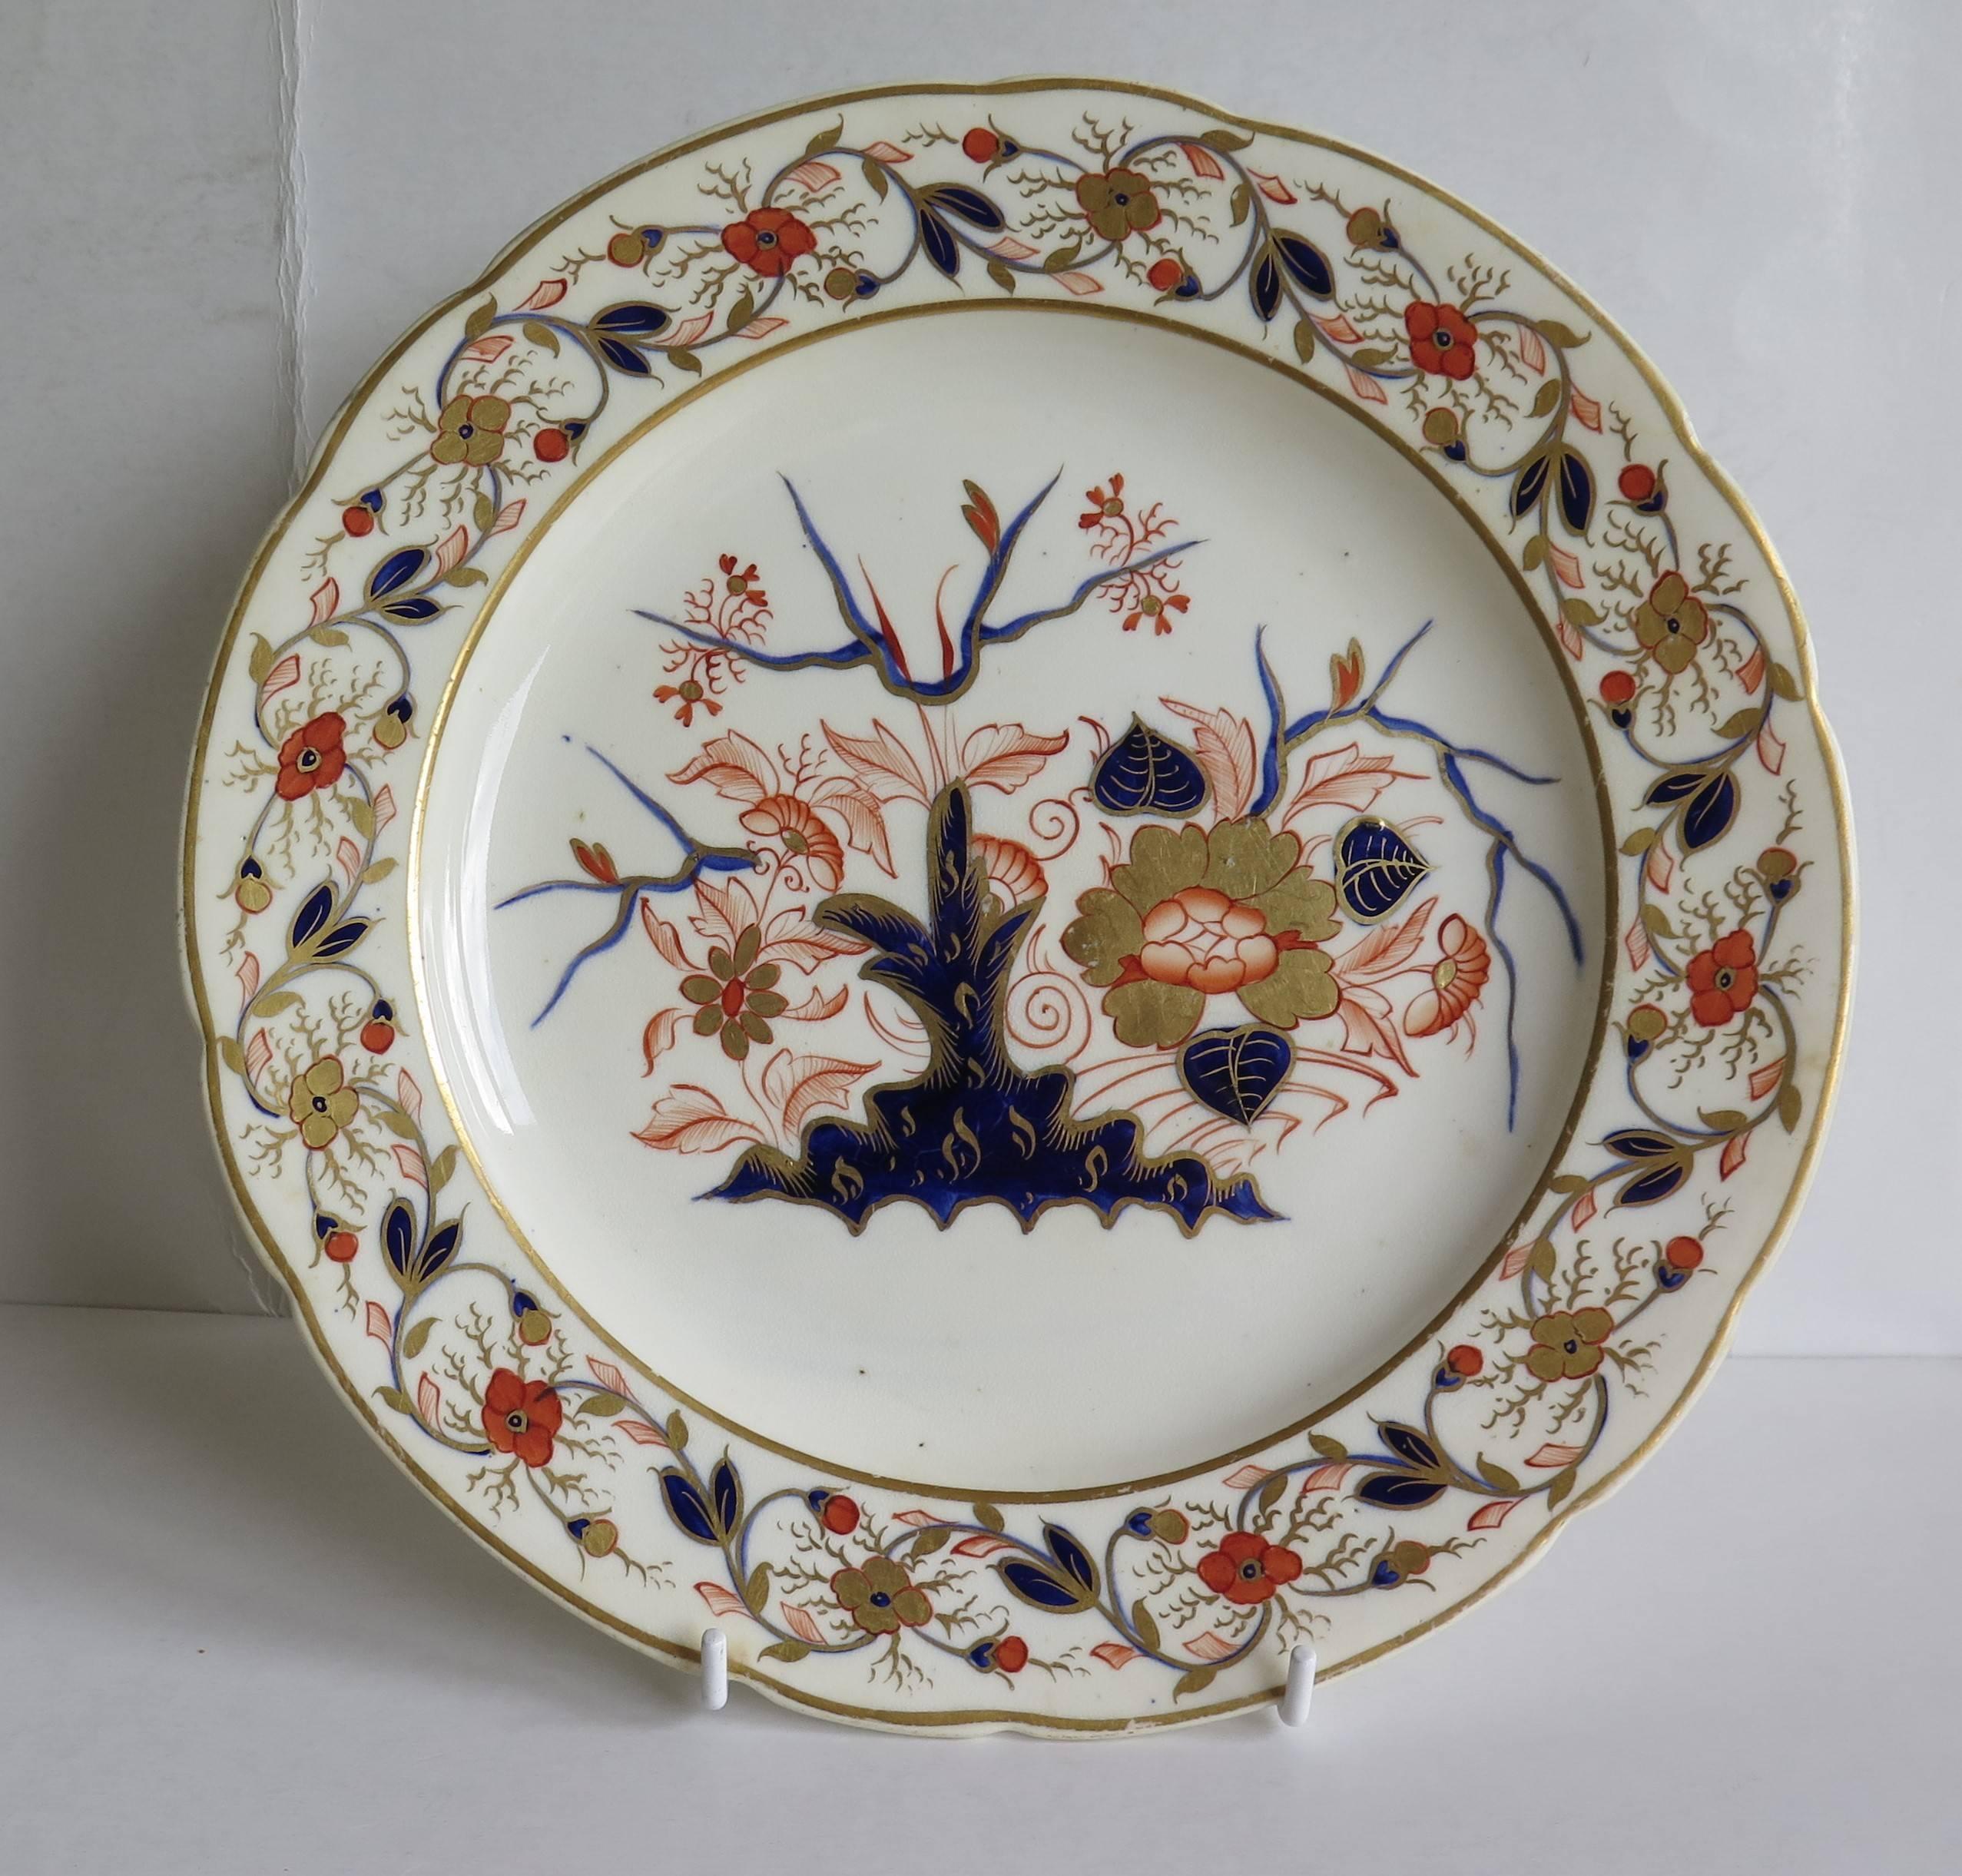 This is a very good early dinner plate from the Derby porcelain factory from the late Georgian period , Ca 1830.

The decoration consists of a continuous intertwining floral sprig border pattern and a central floral pattern set among rocks in the